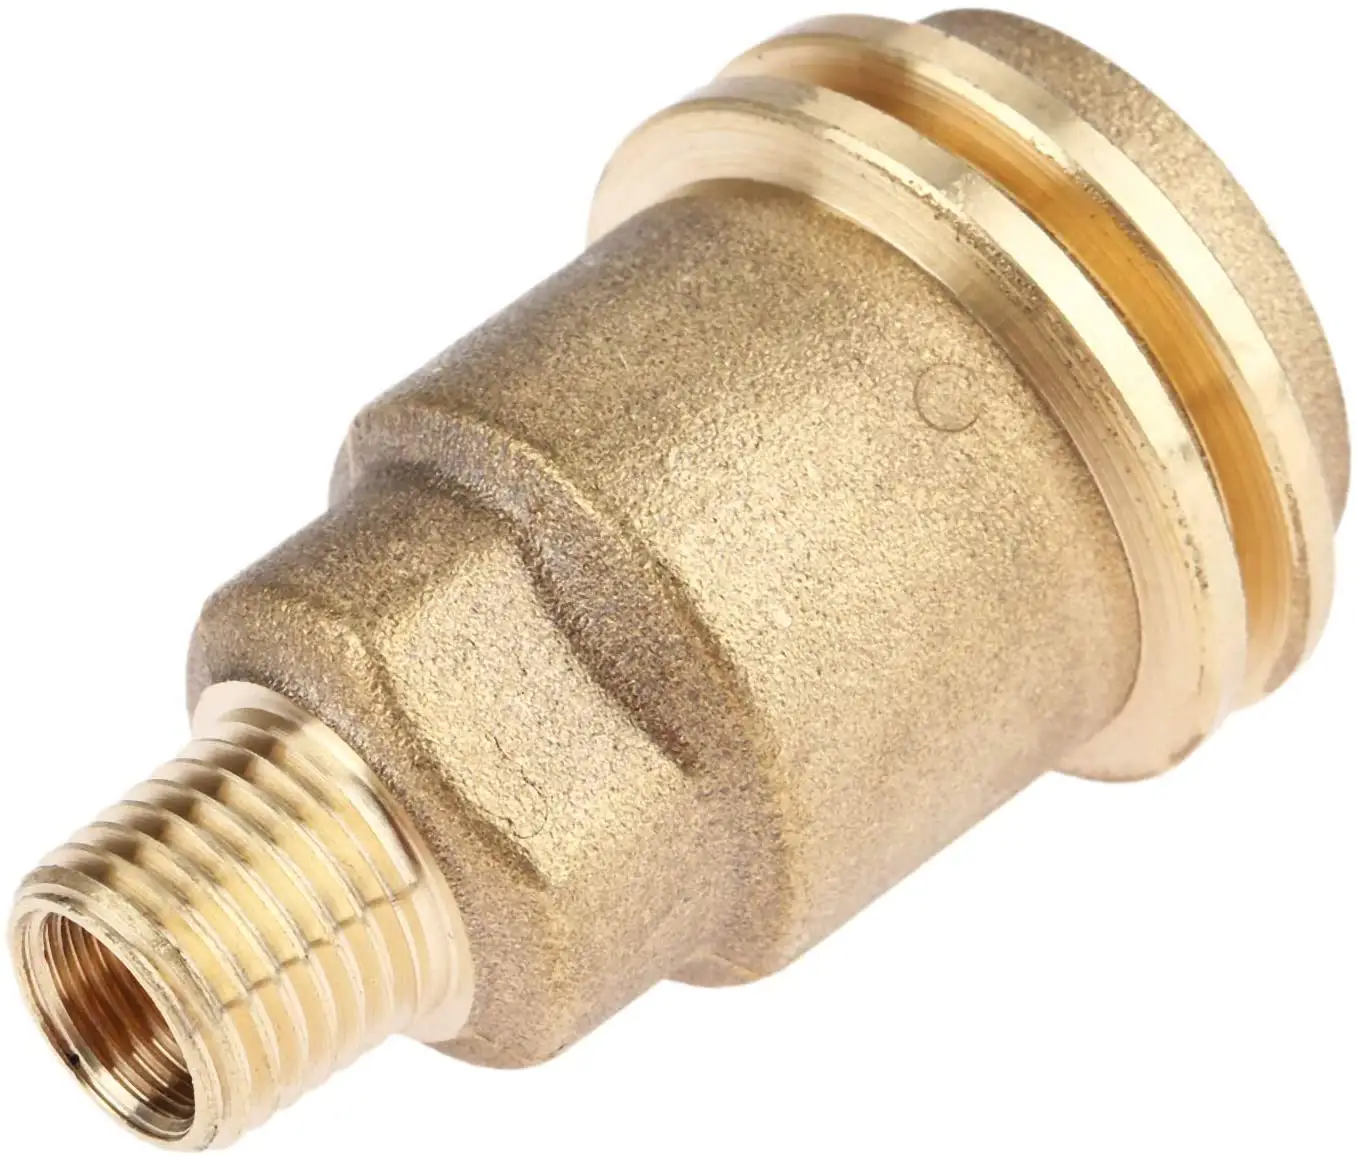 Male 5042 QCC1 Acme Nut Propane Gas Fitting Adapter with 1/4 Inch Male Pipe Thread, Propane Quick Connect Hose Adapters Fittings